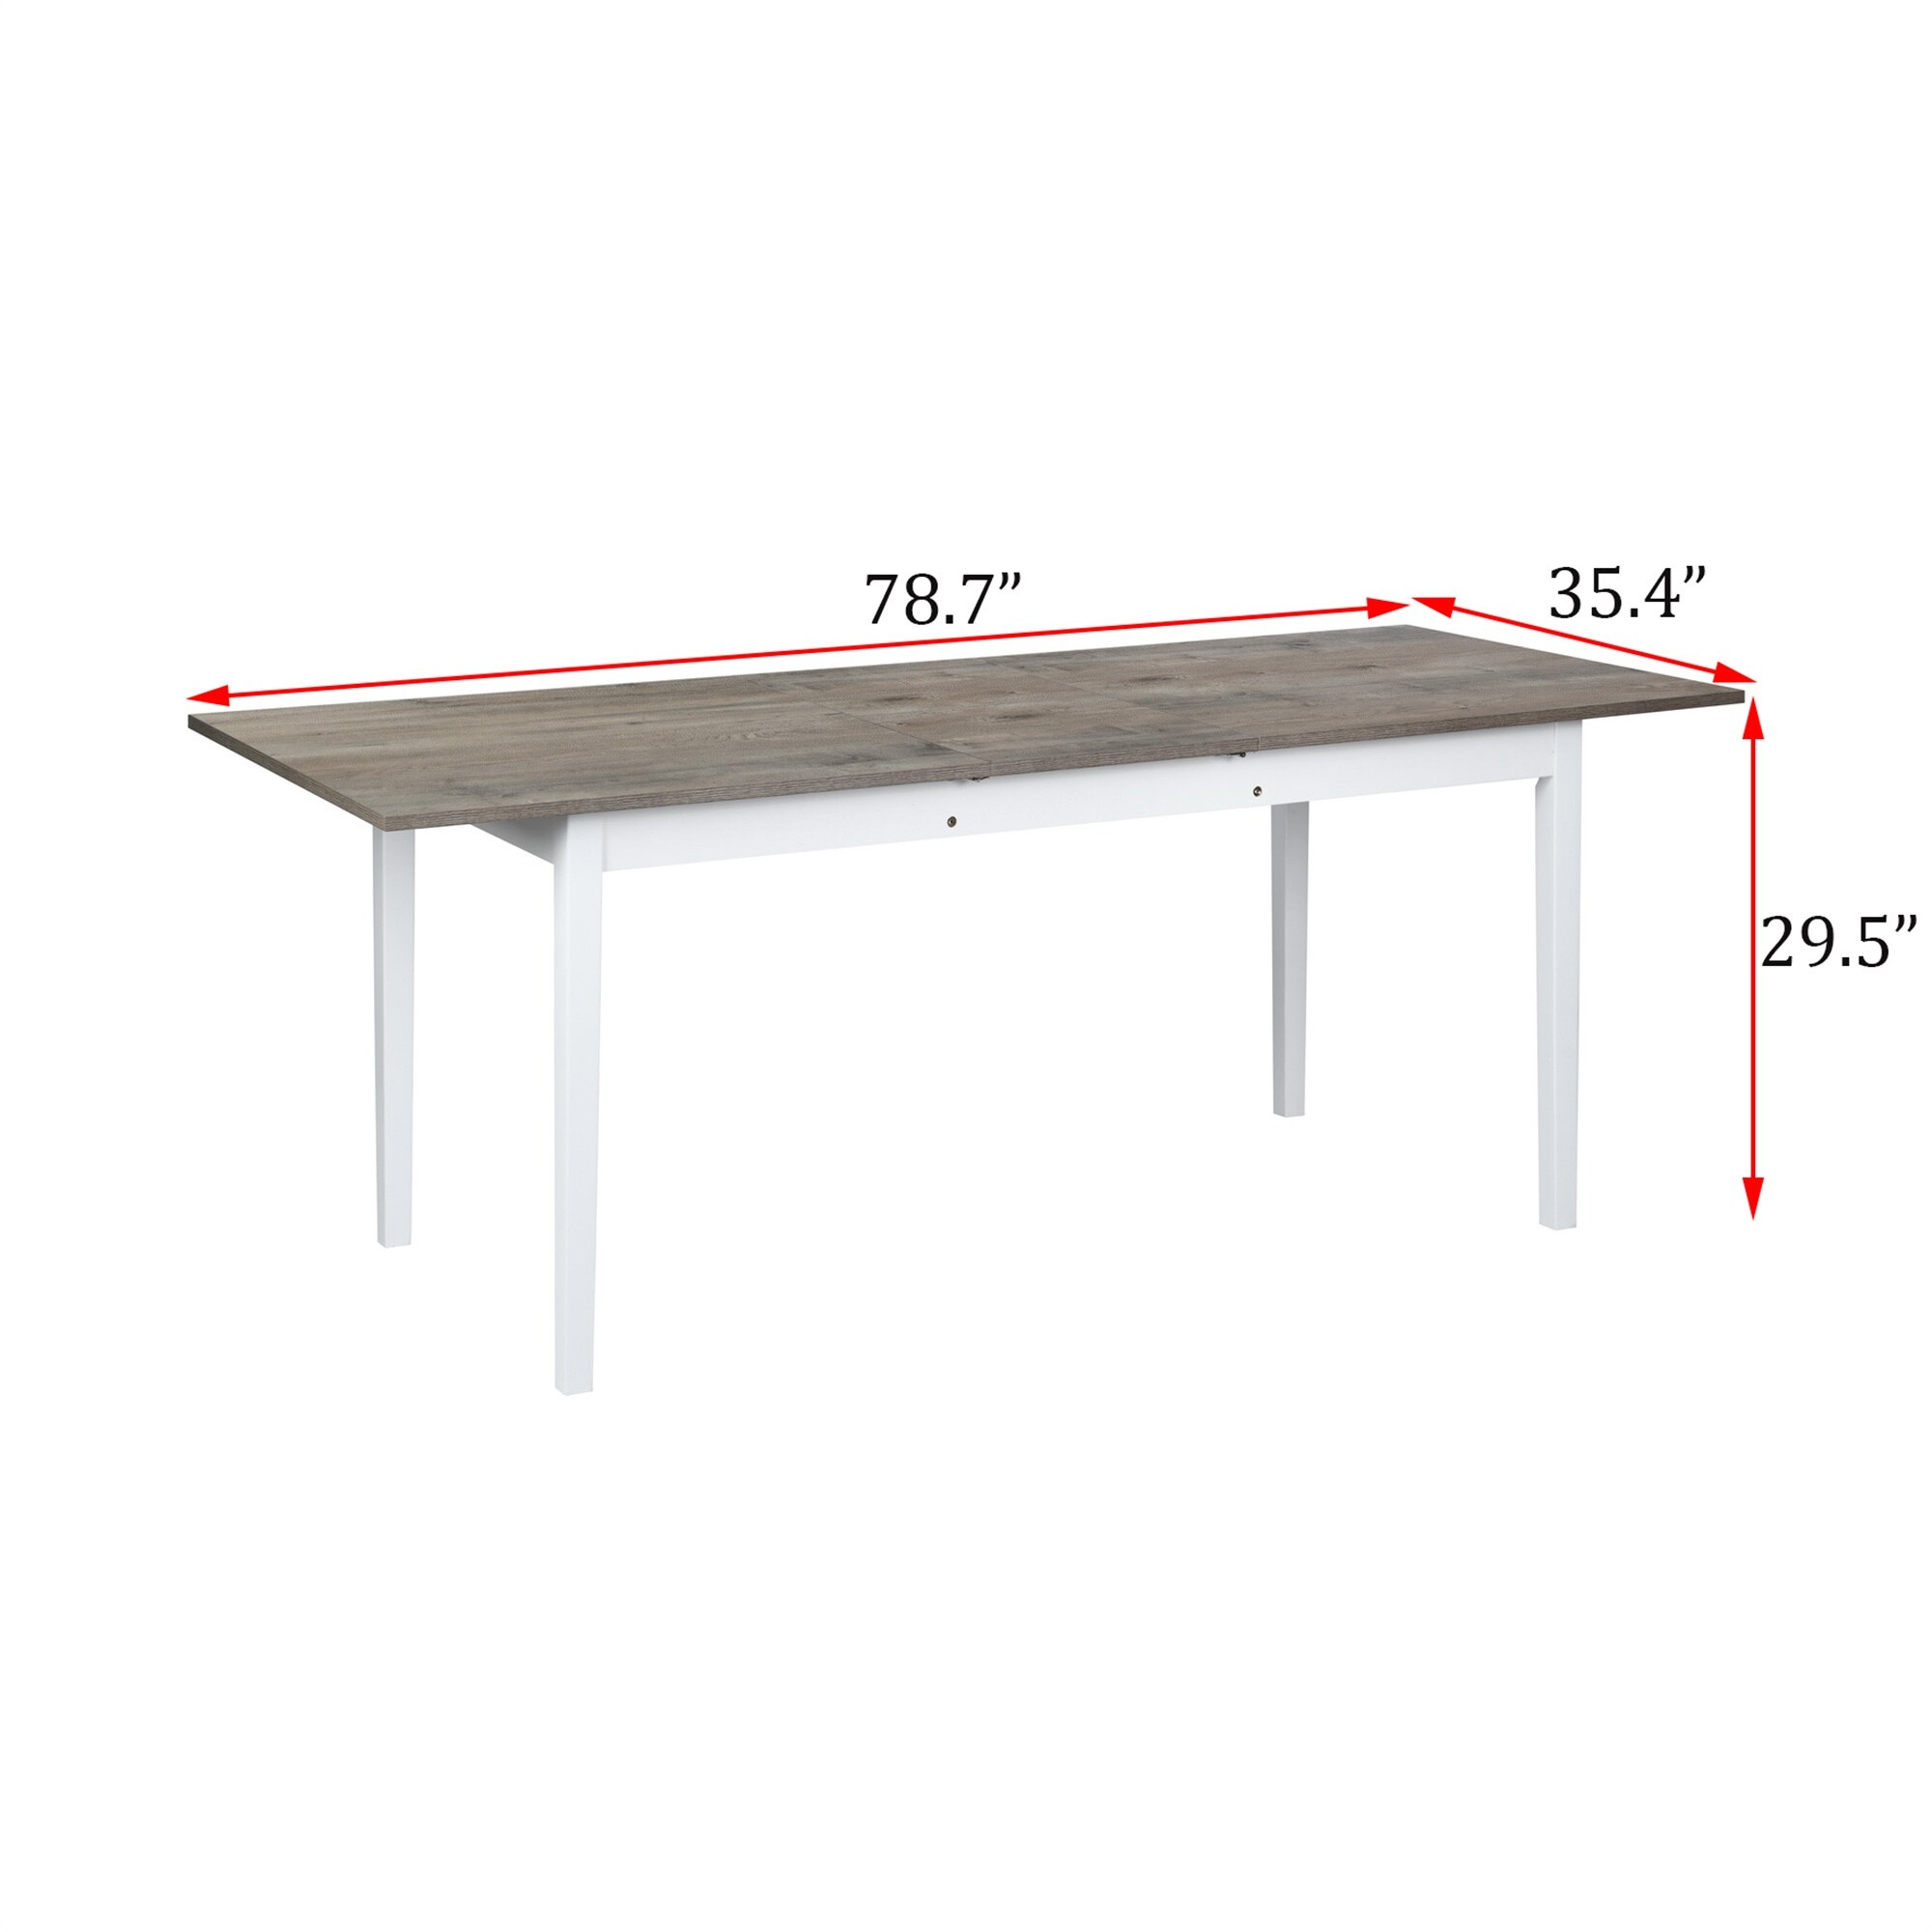 Extendable Dining Table, Eating Table W/ Extension Leaf for Party